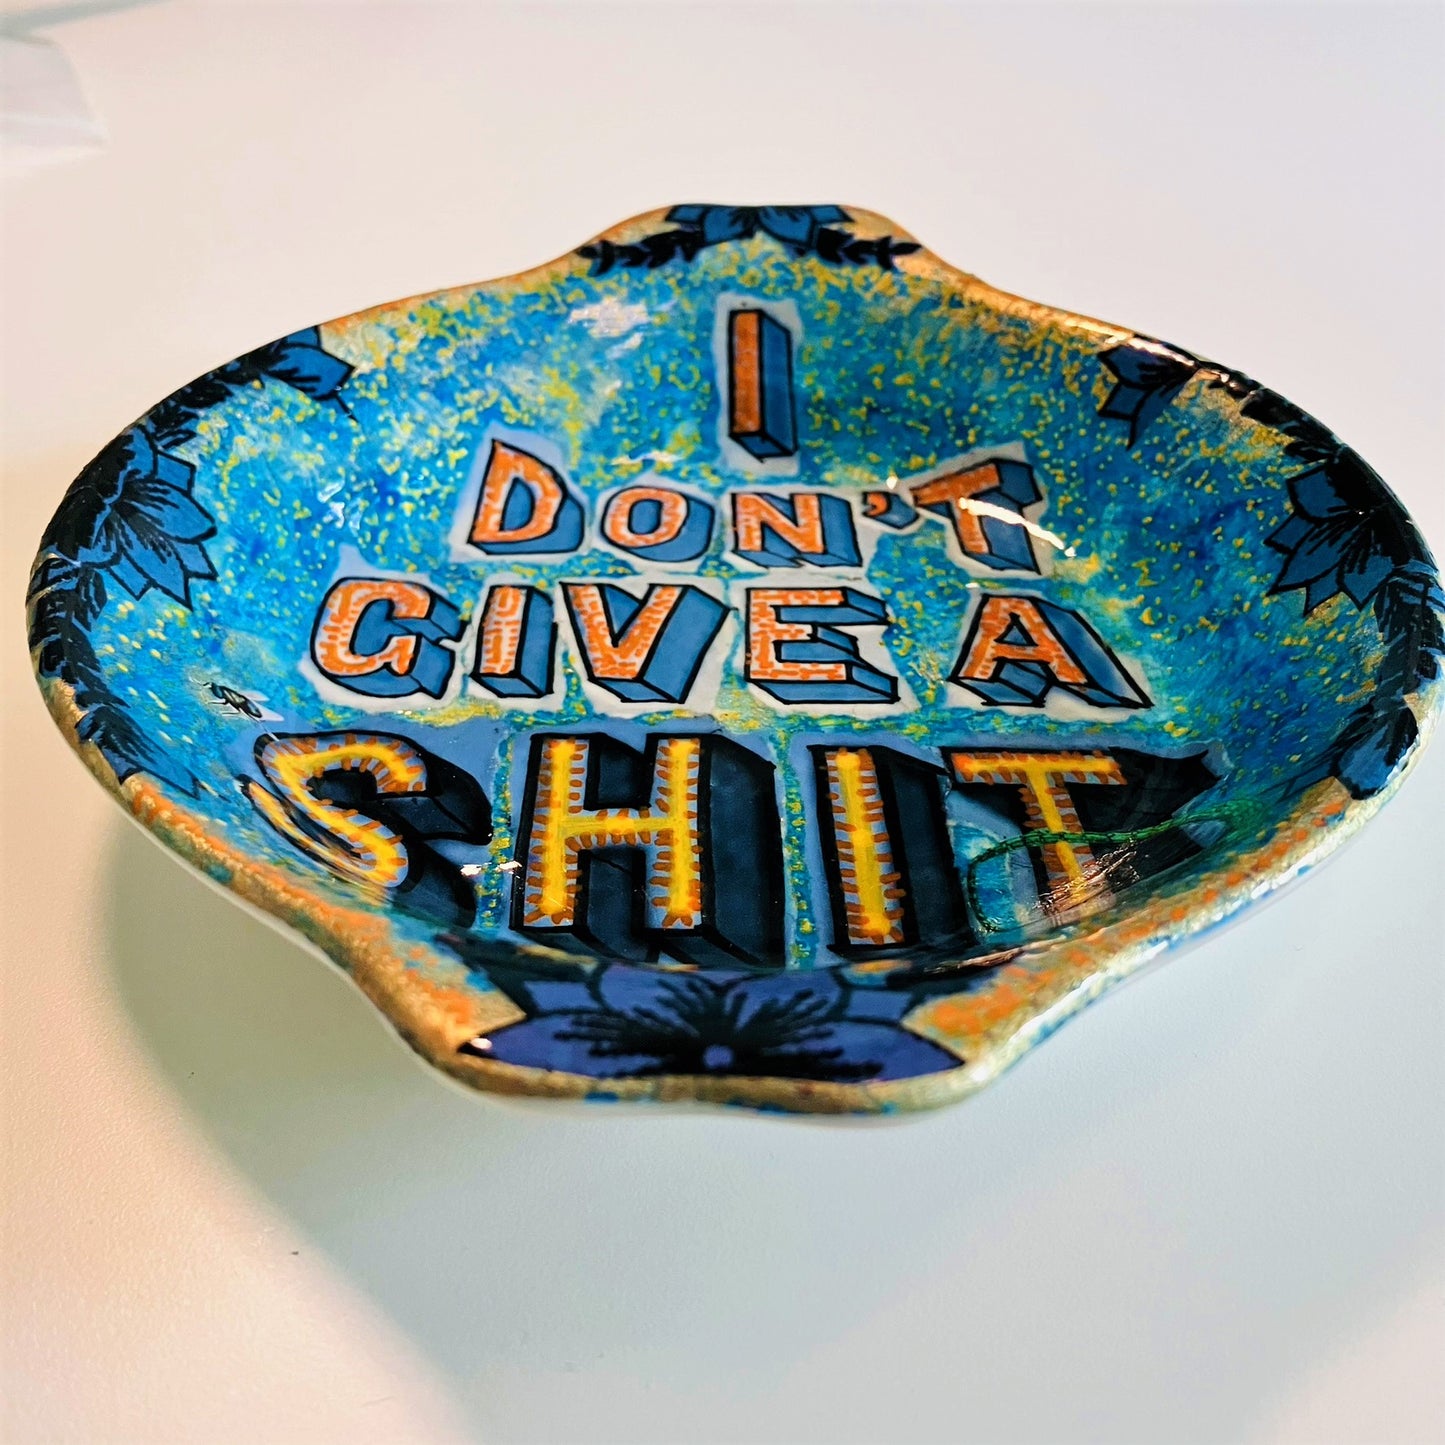 Blue Upcycled Wall Plate - "I Don't Give A Shit" - by House of Frisson